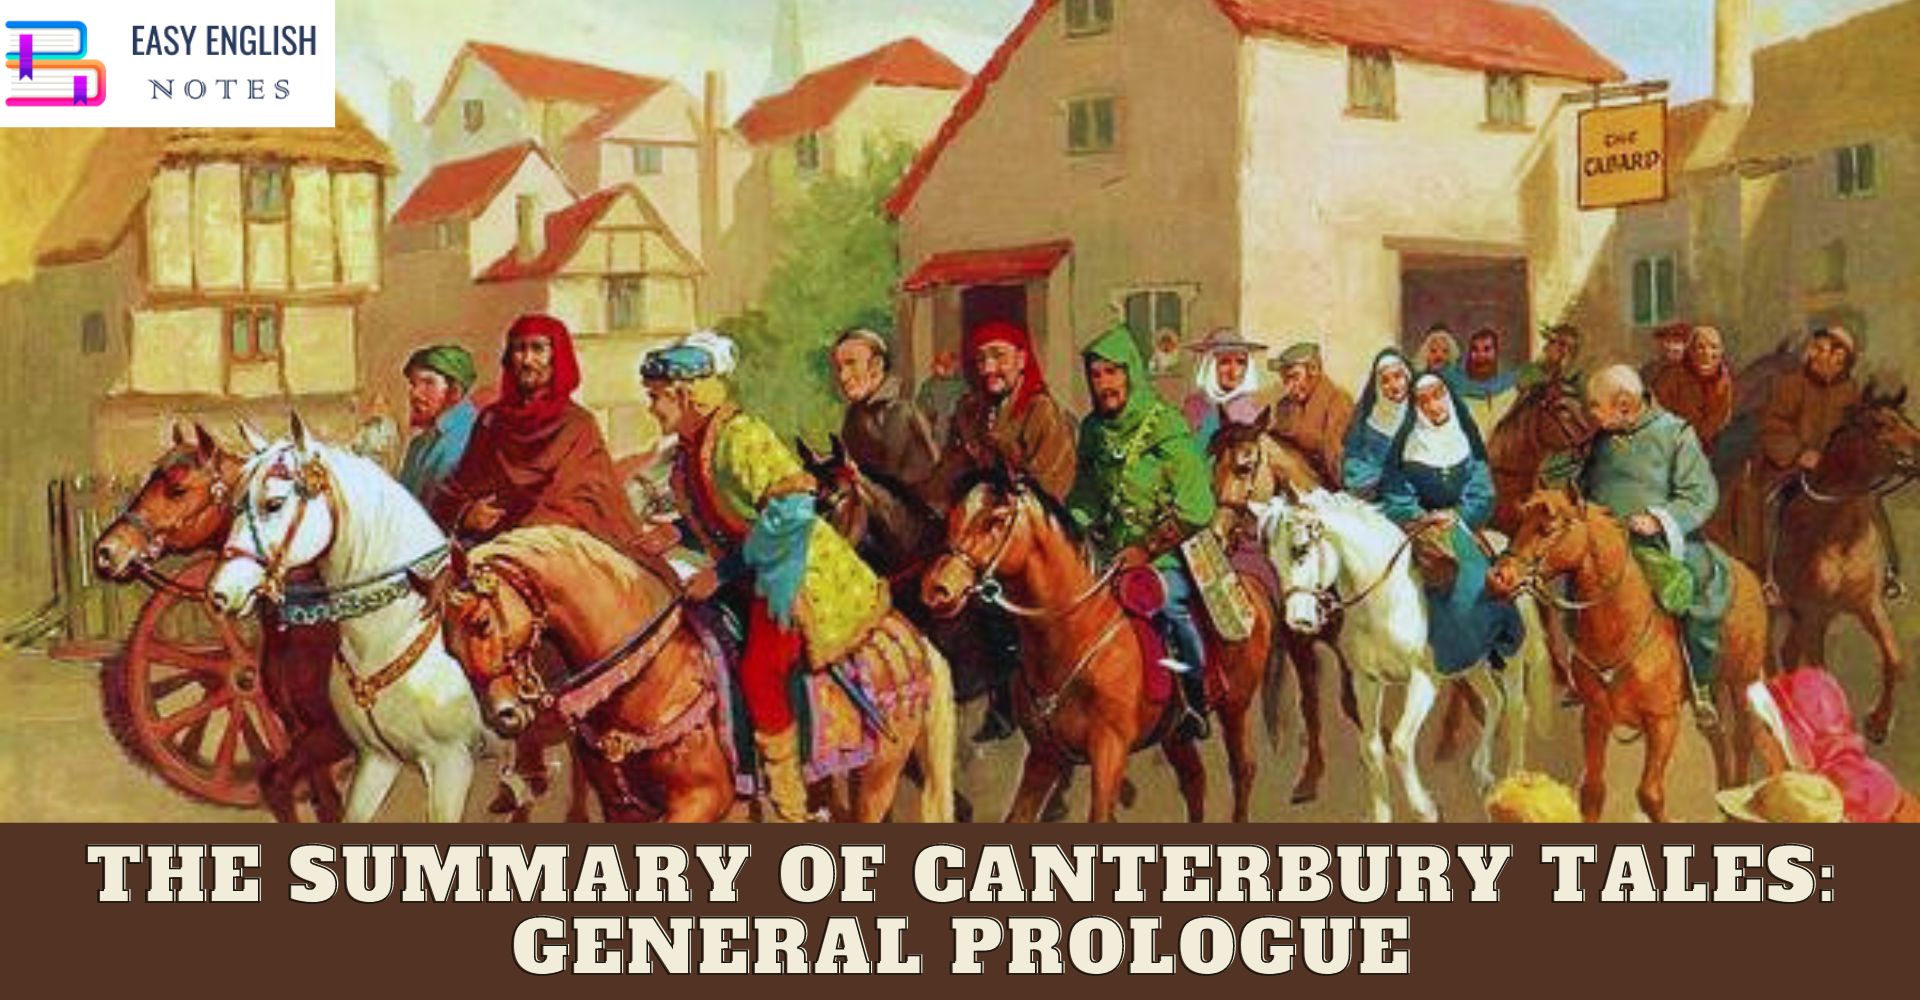 The Summary of Canterbury Tales: General Prologue